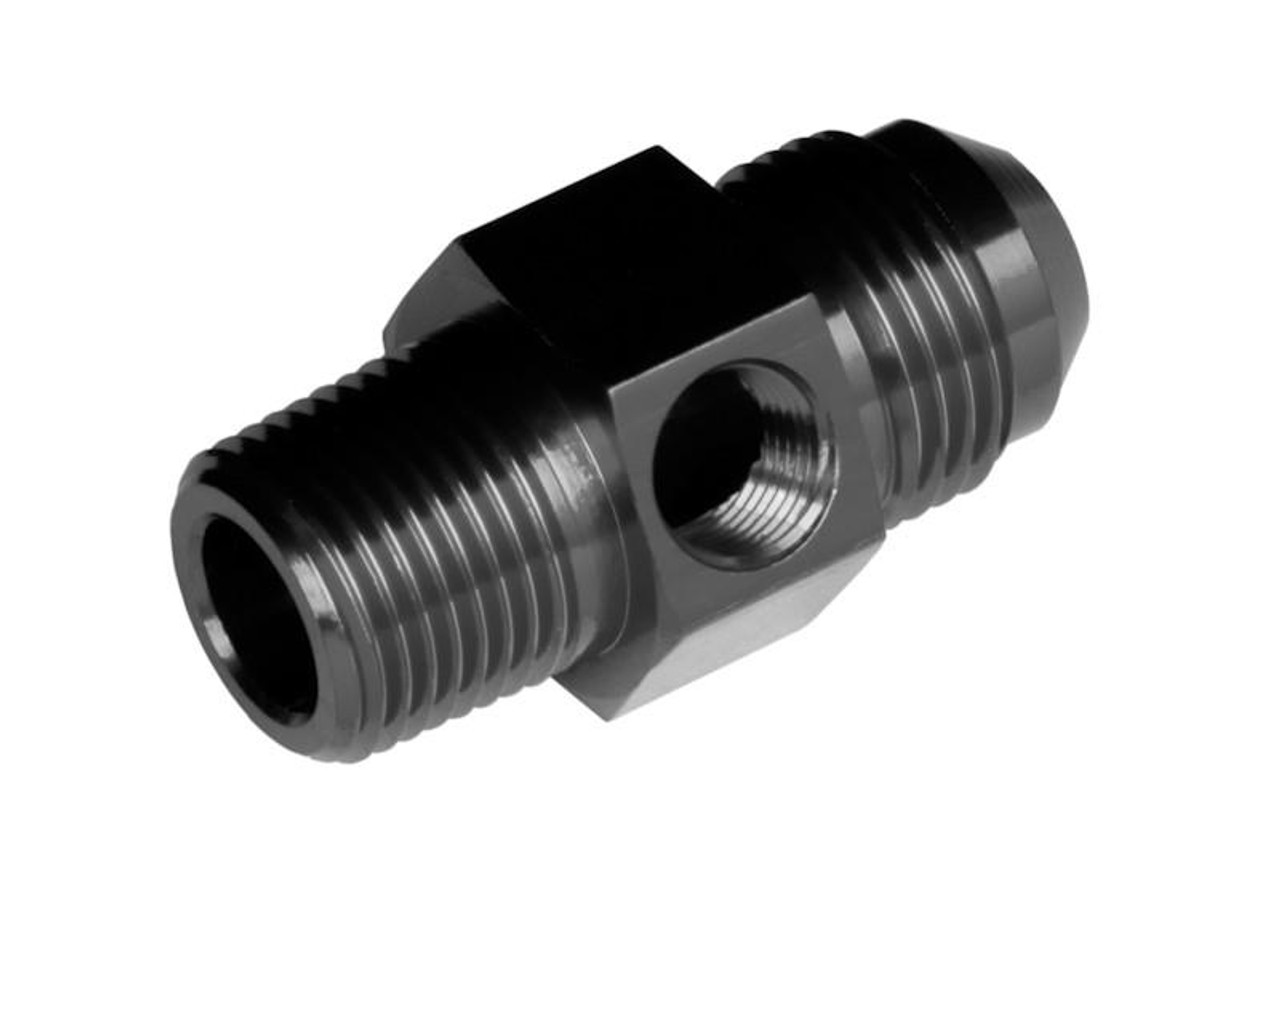 Redhorse Performance -08 Male AN to -04 (1/4″) NPT Male with 1/8″ NPT hex – Black